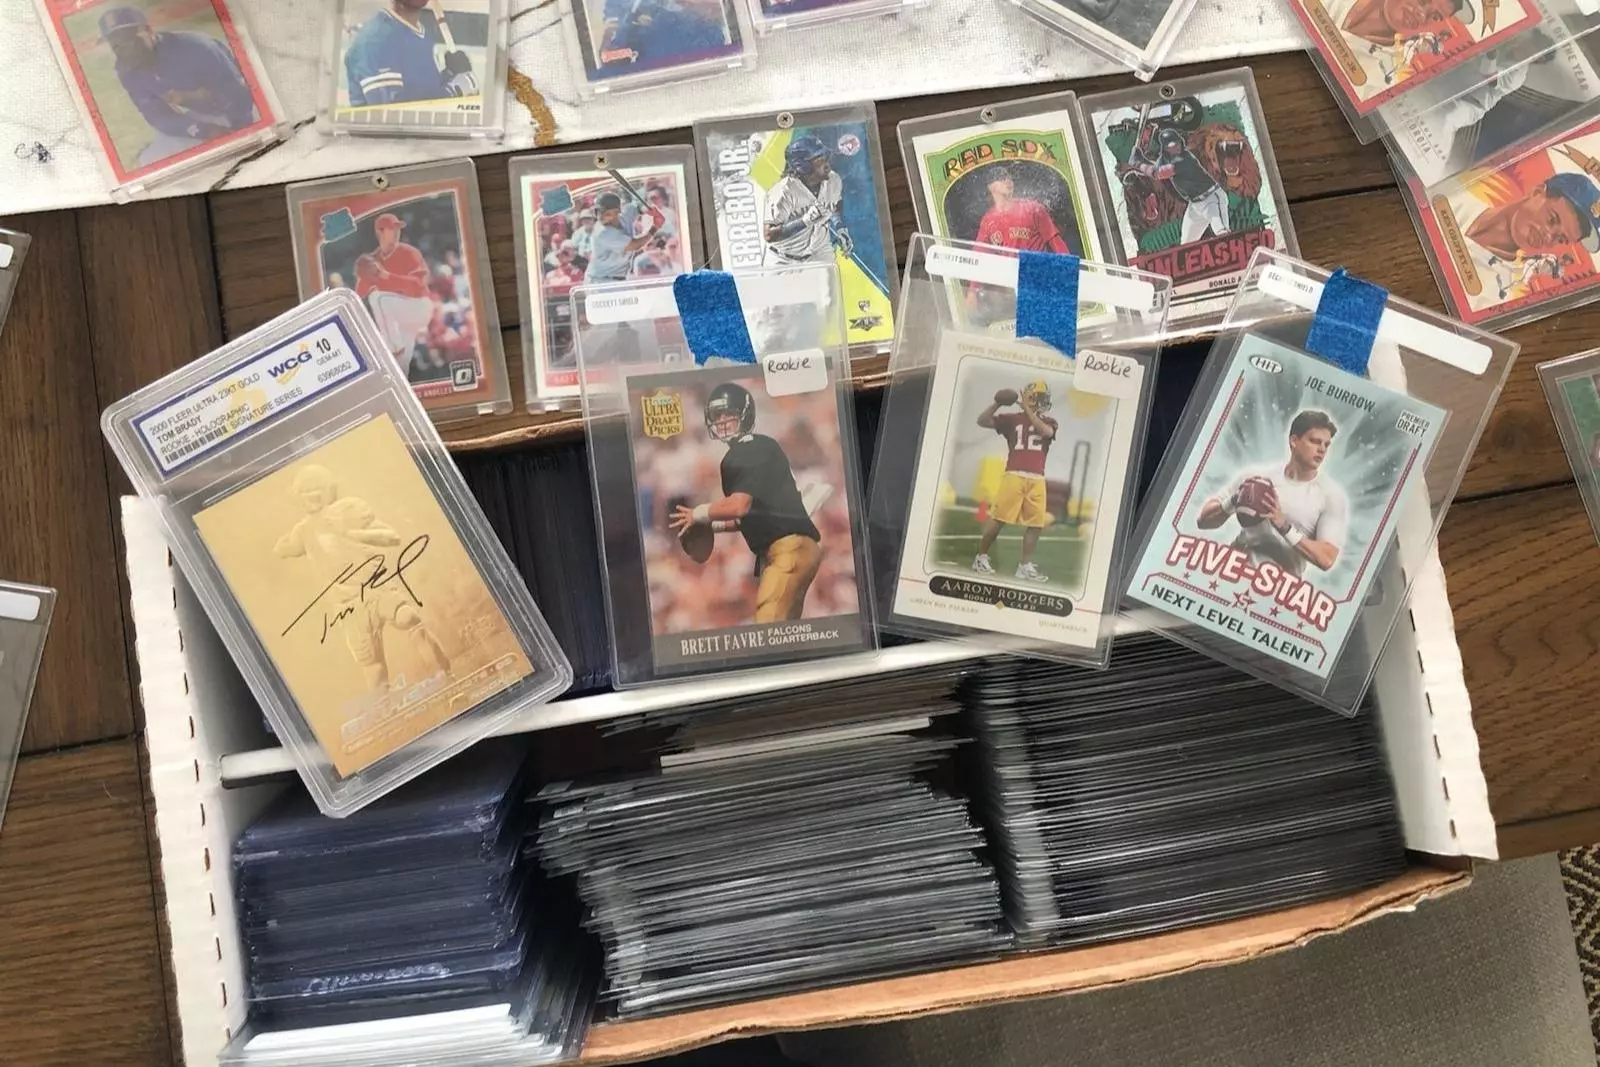 Curse of the Bambino No Problem for One Massachusetts Collector